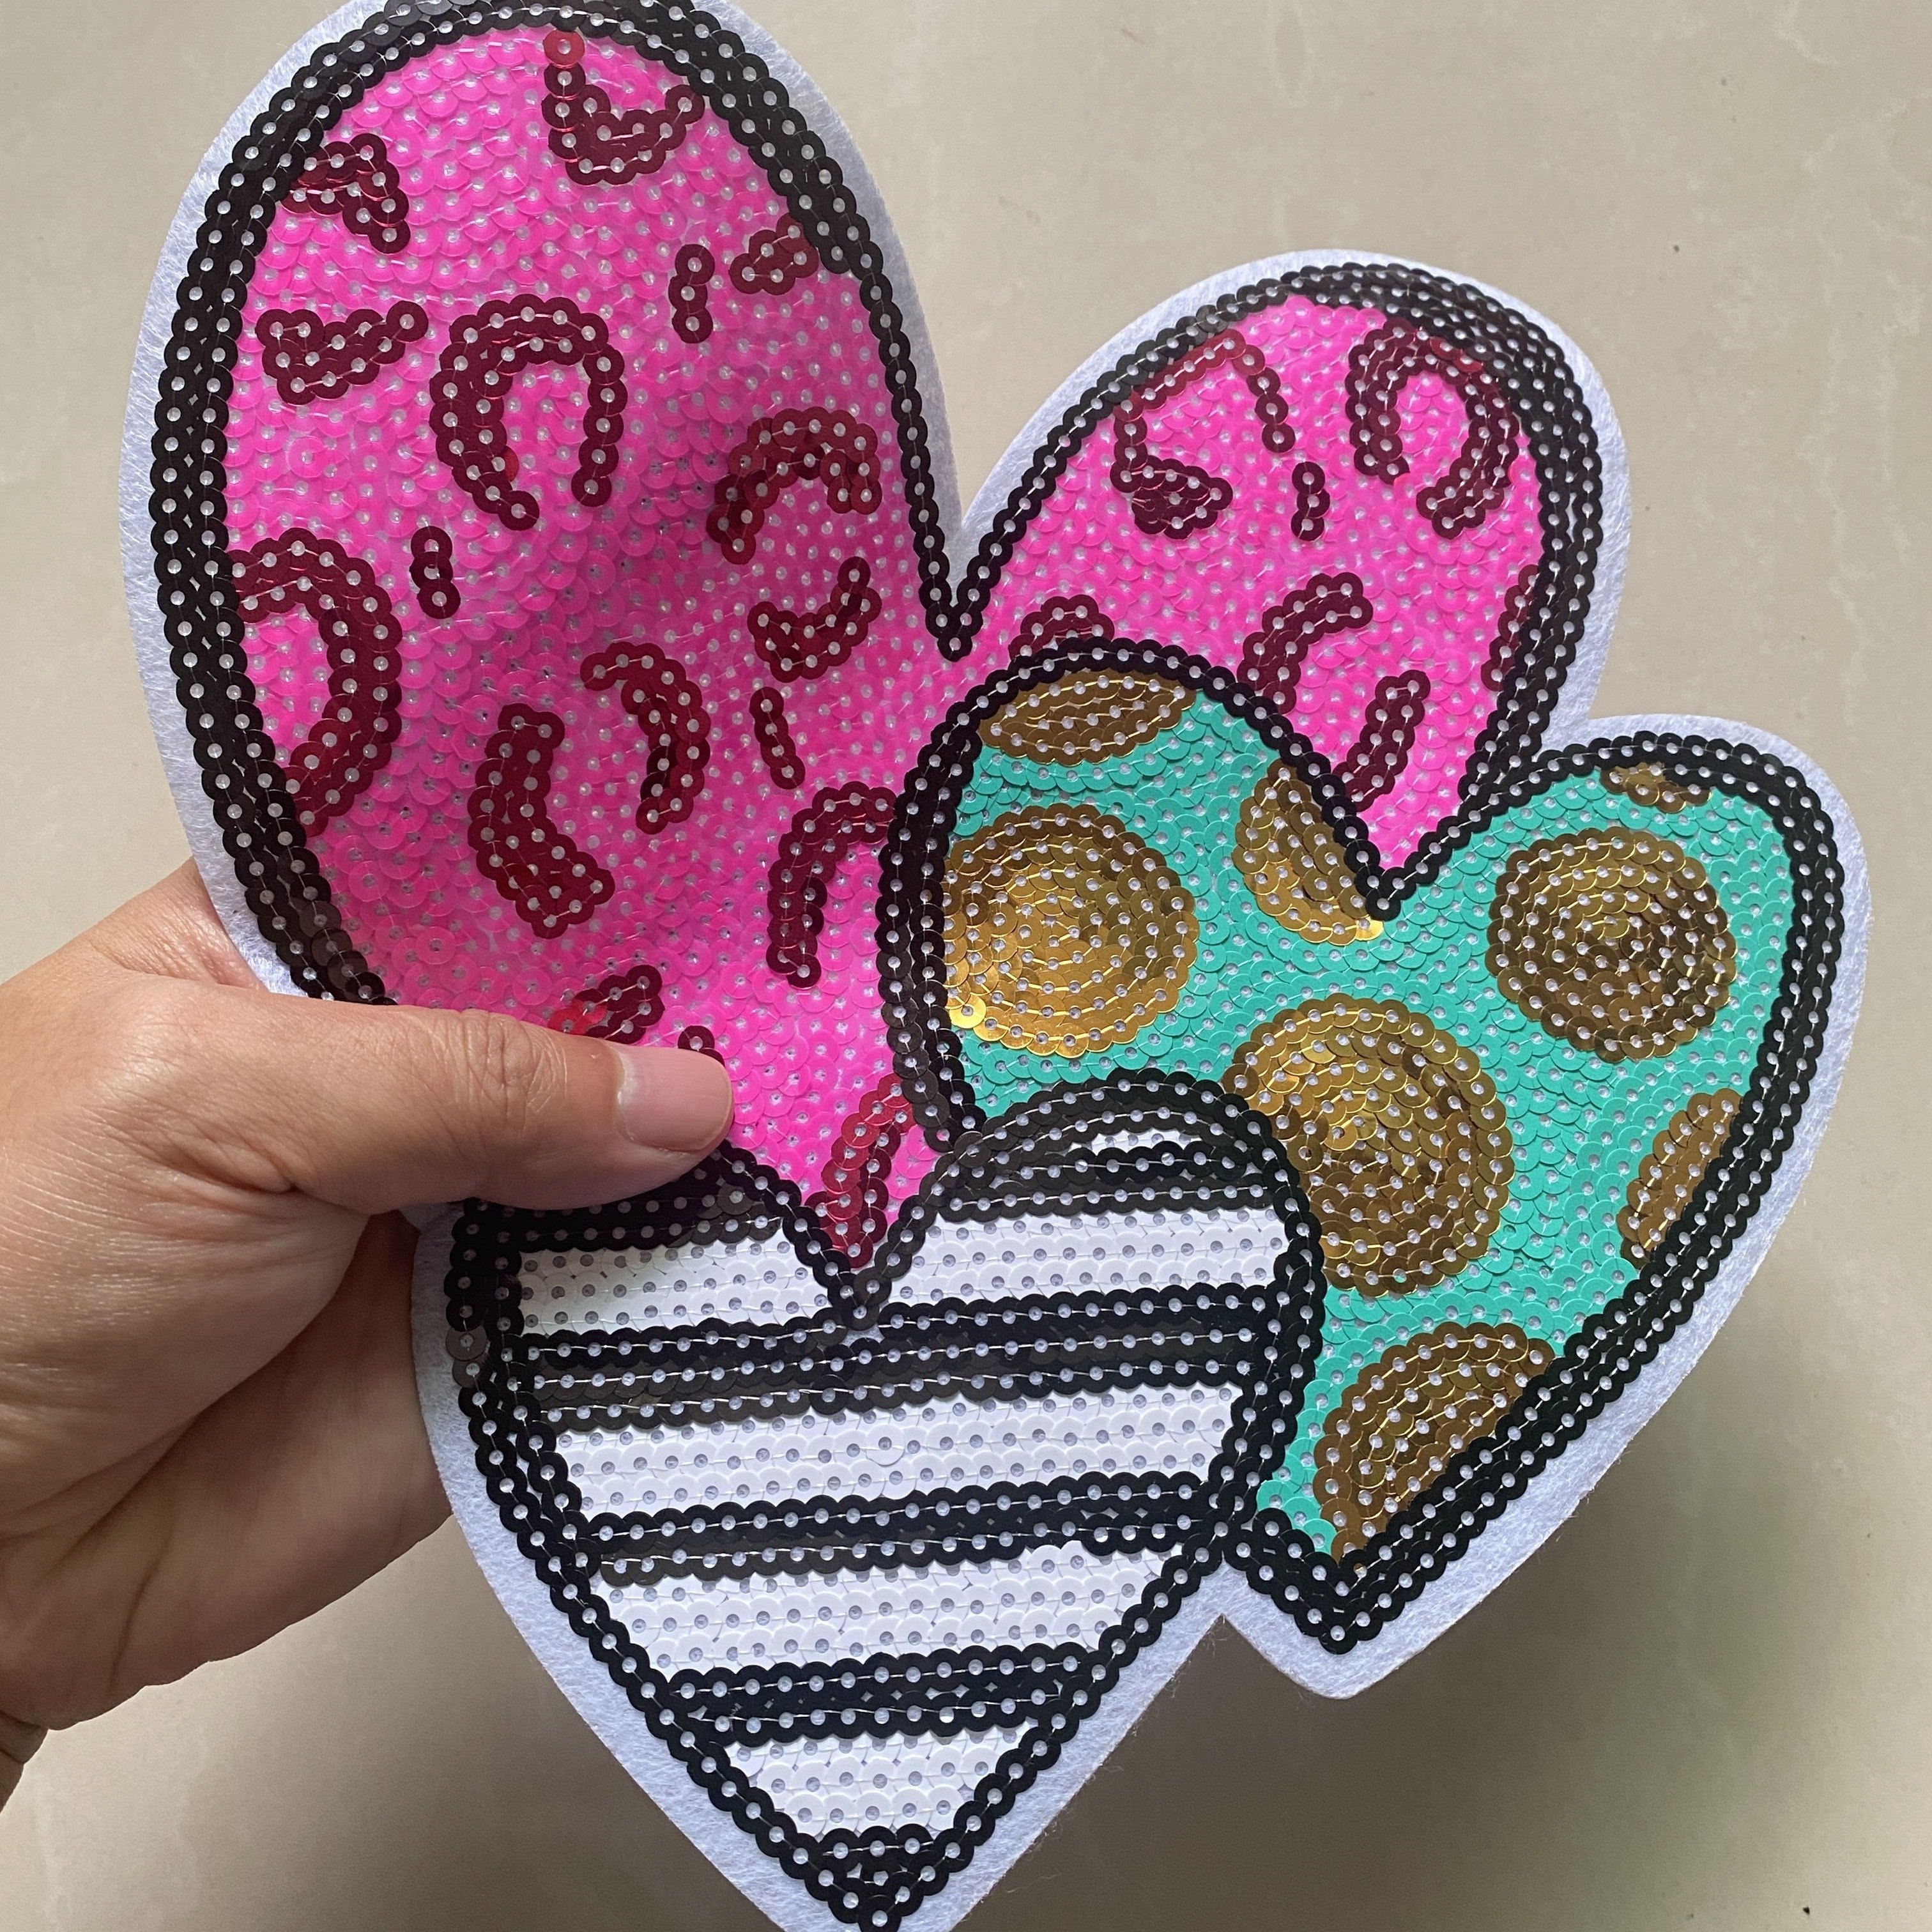 1PCS Heart-Shaped Embroidery Iron on Patches for Clothing Stickers